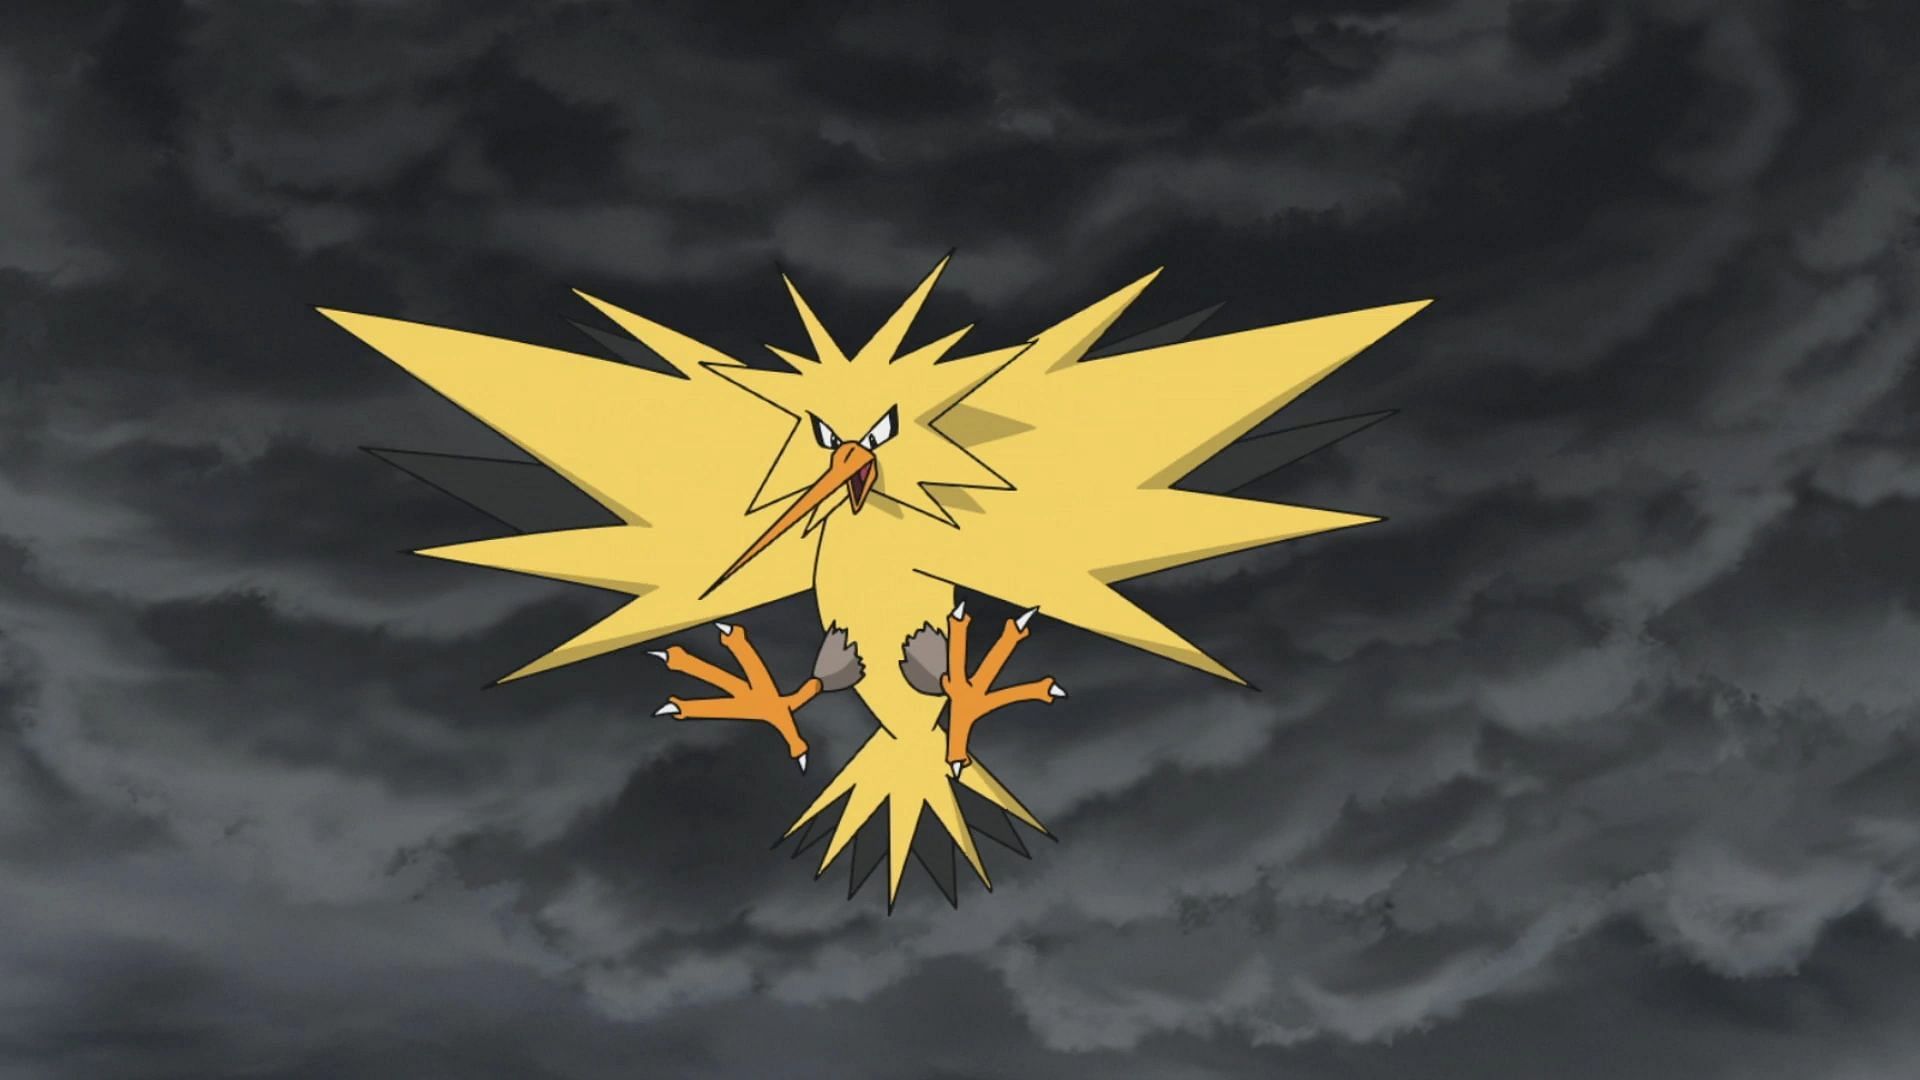 Zapdos as it appears in the anime (Image via The Pokemon Company)